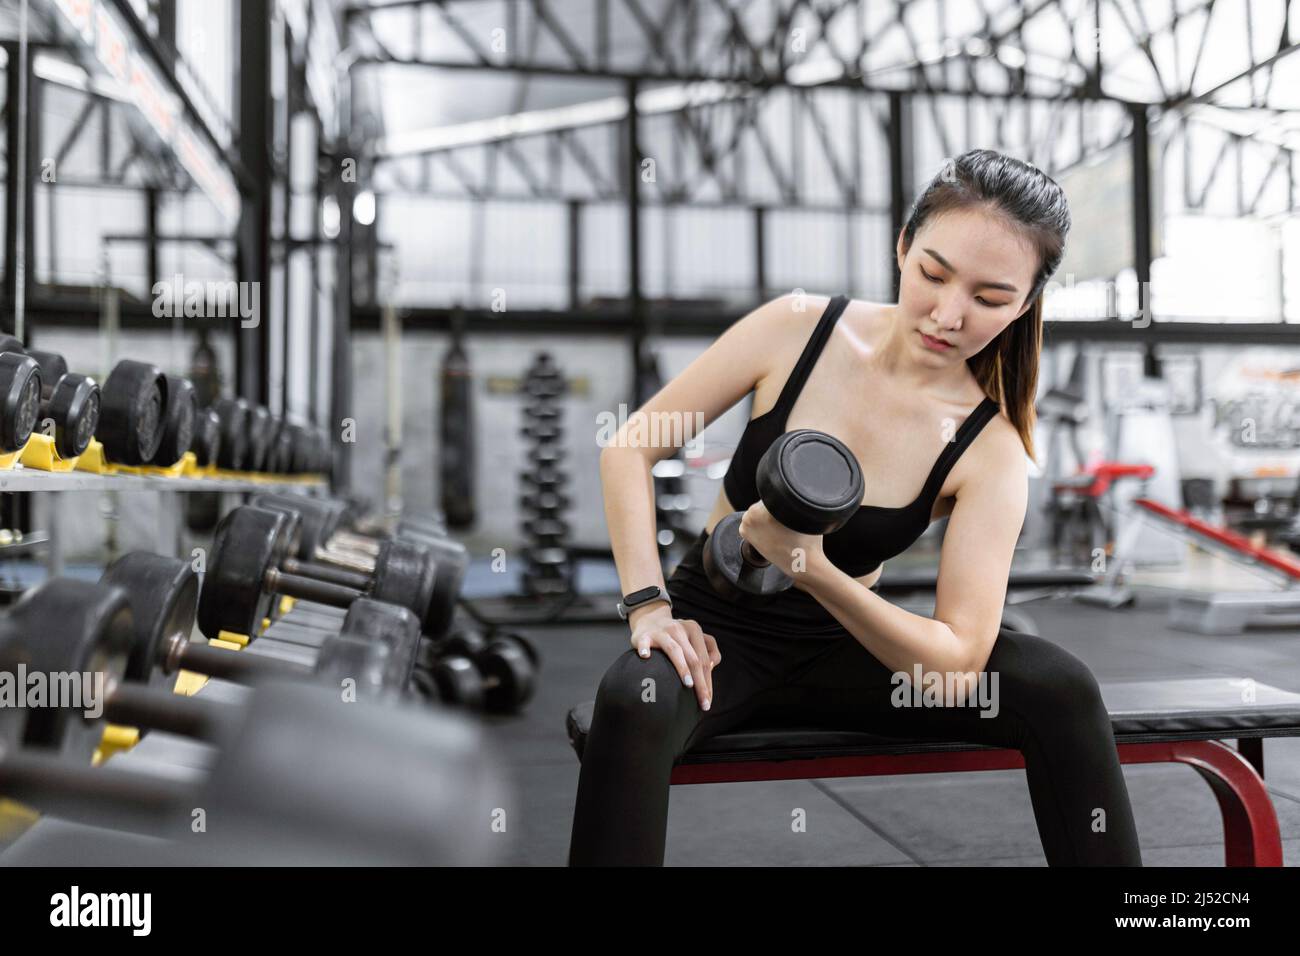 exercise concept The working out lady paying attention on carrying a dumbbell with her right hand while sitting on the bench earnestly. Stock Photo